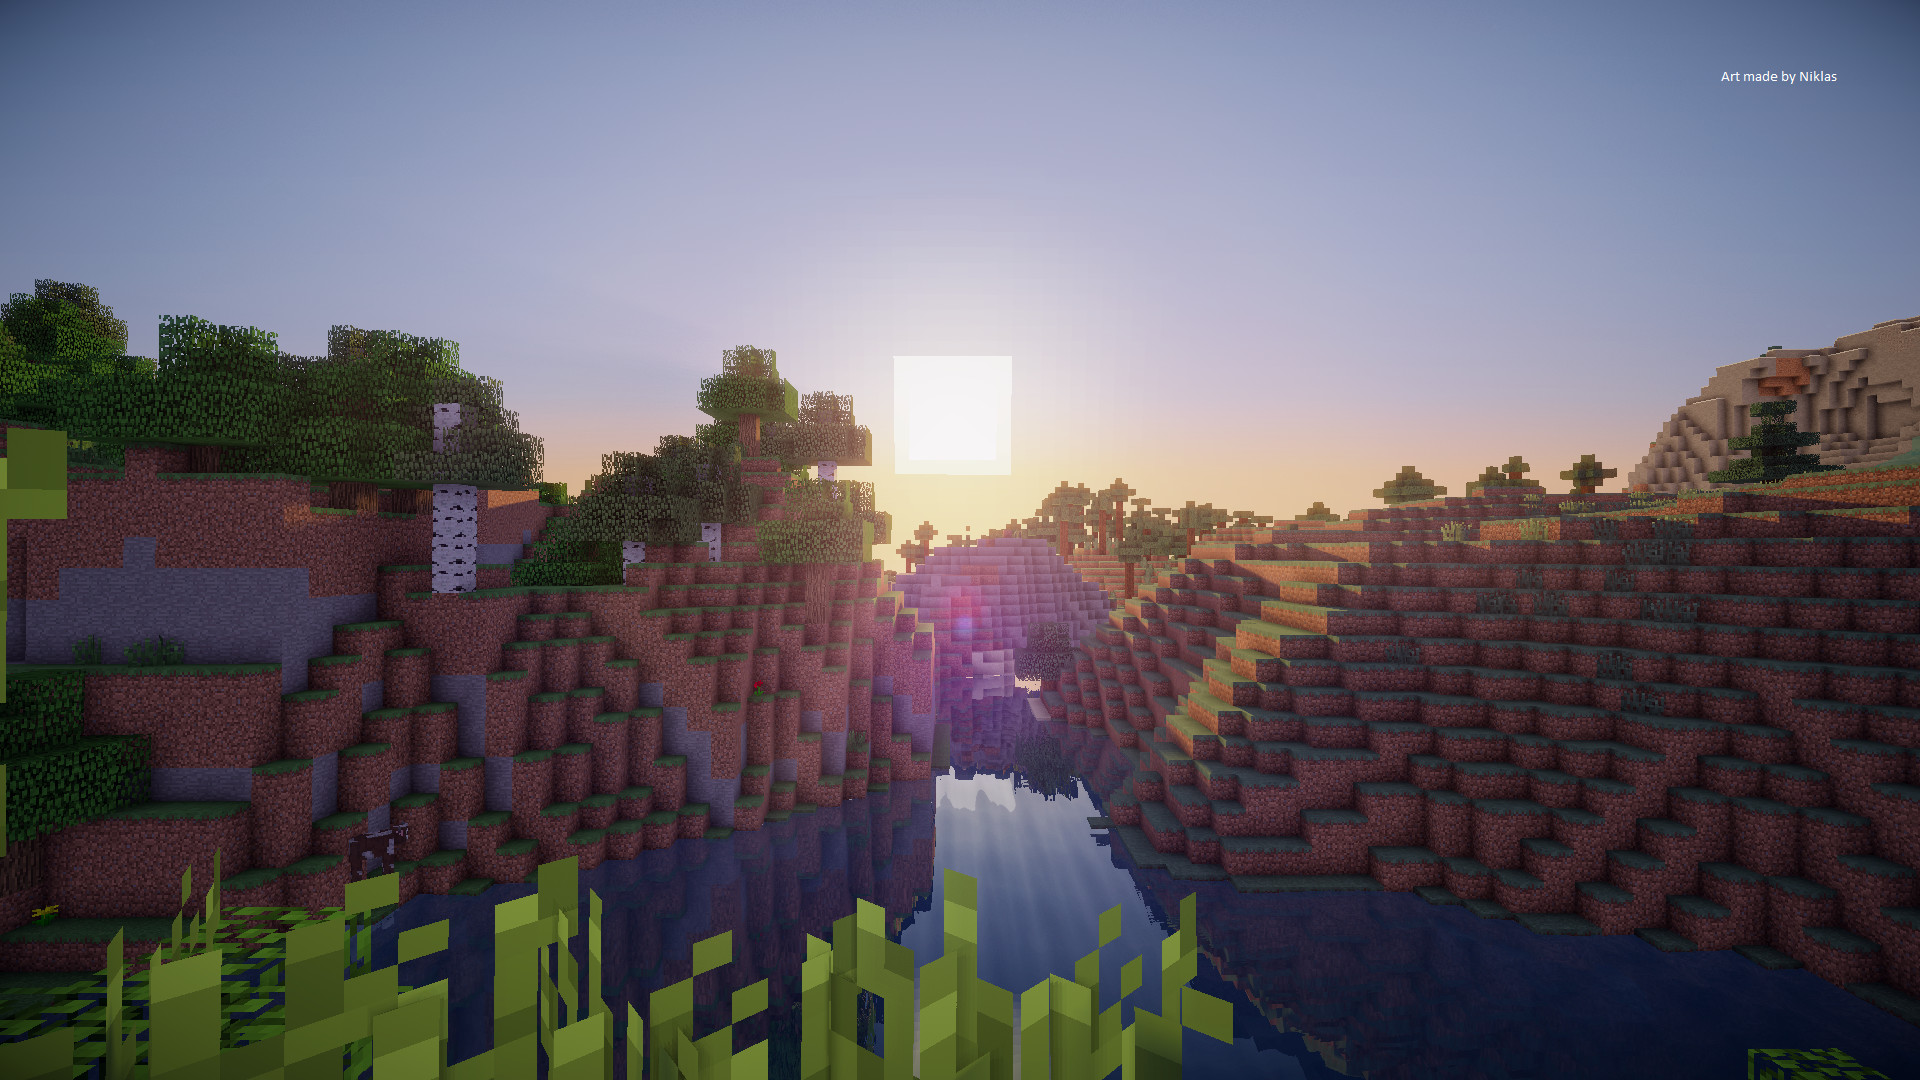 Hd Minecraft Background By Banetm Hd Minecraft Background By Banetm 1920x1080